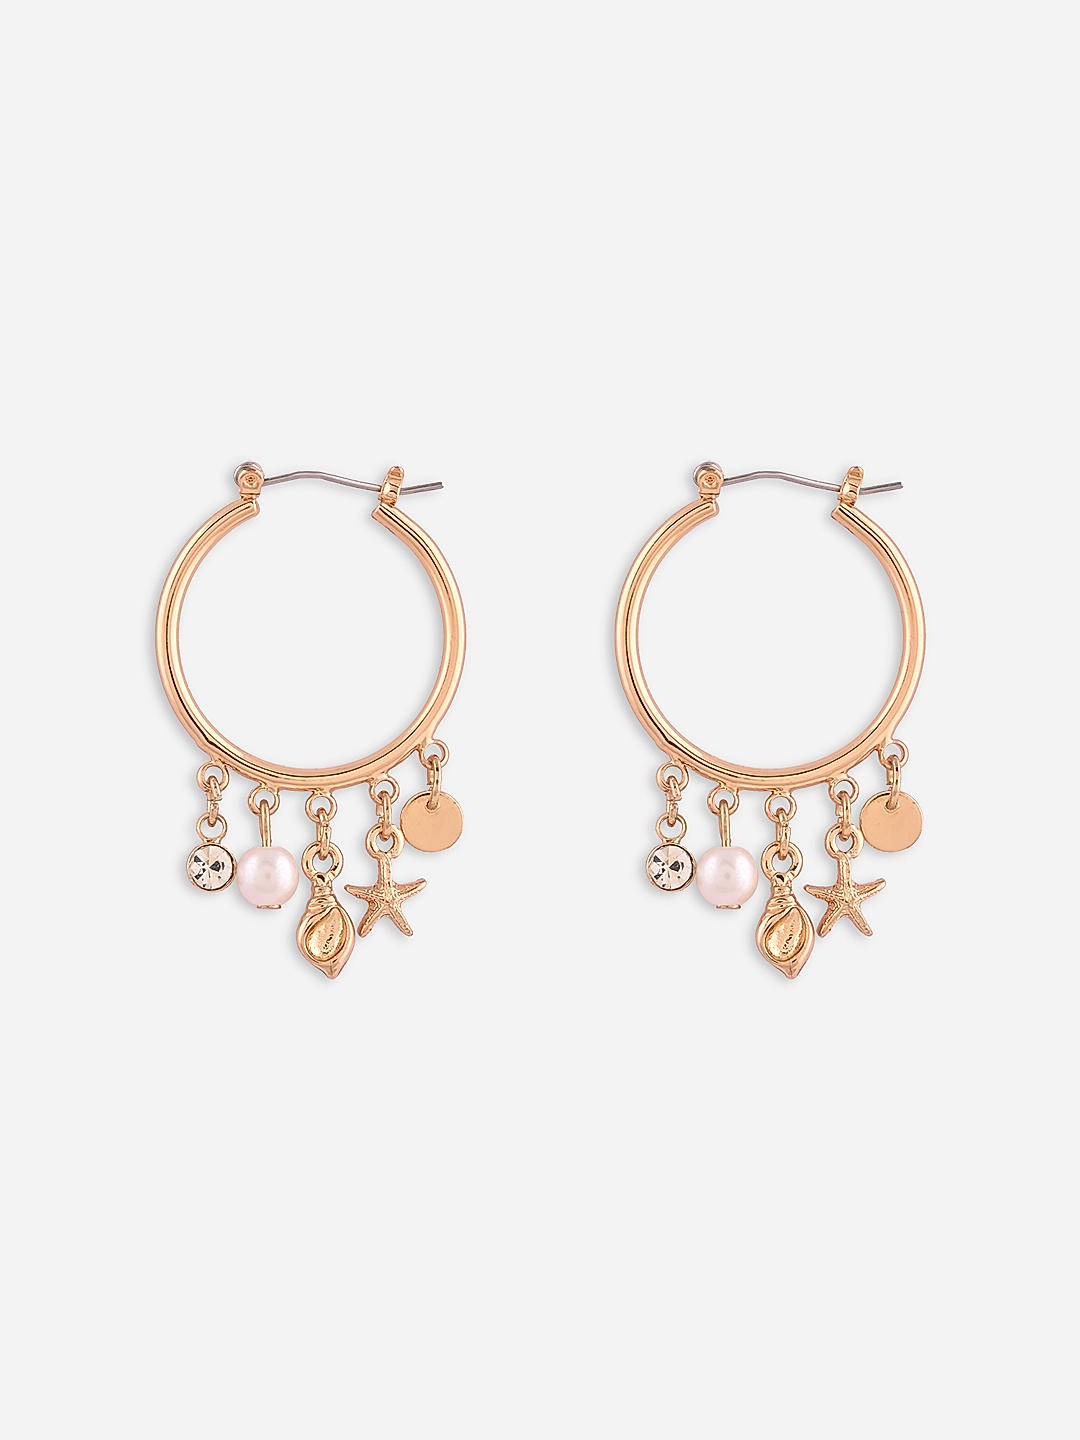 Shop by Toniq Casual Gold Plated Star Moon Hanging Hoop Earrings for Women